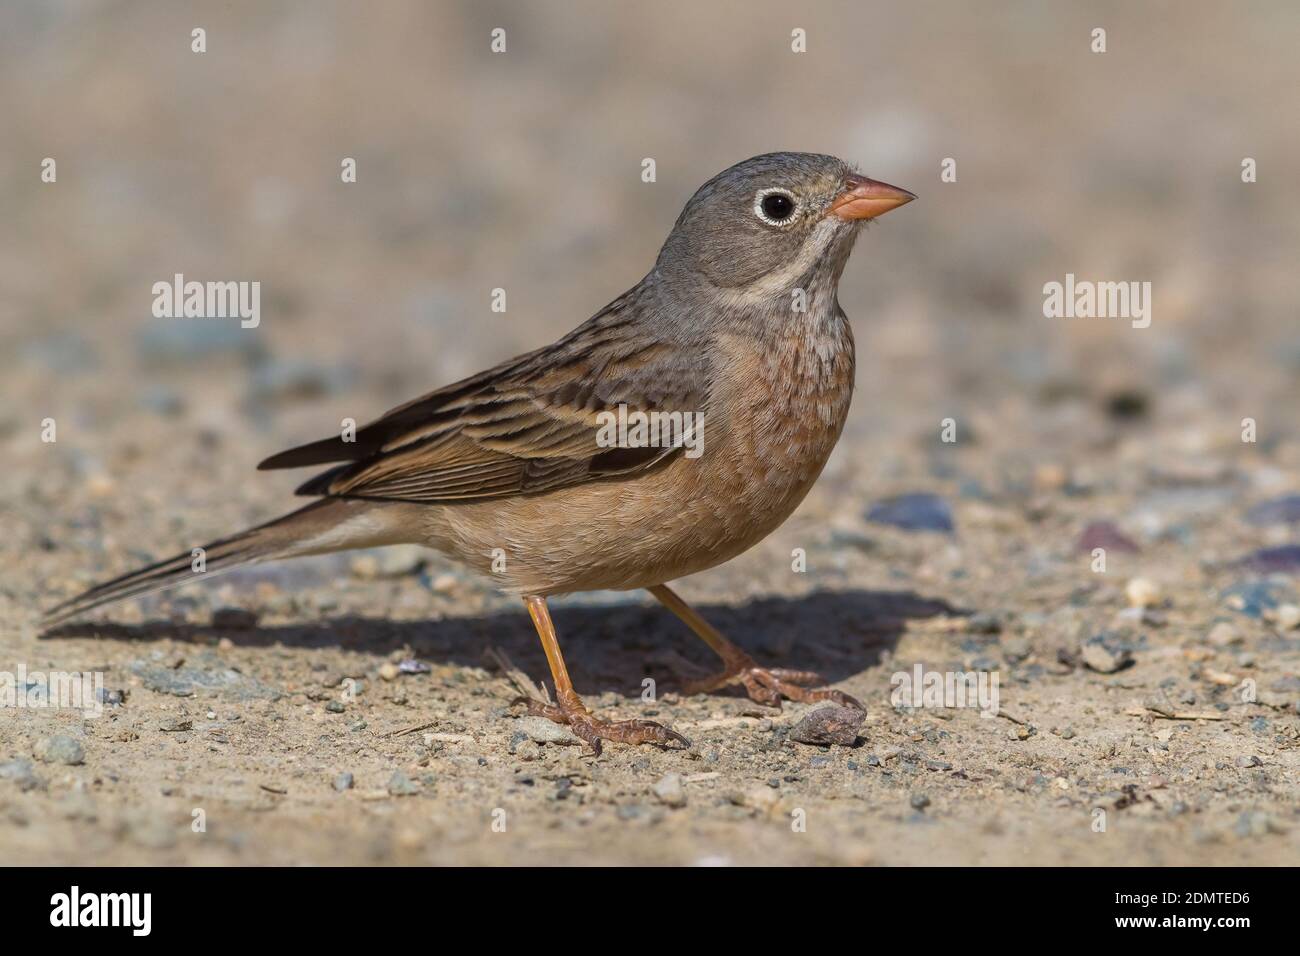 Adult Grey-necked Bunting standing on the ground. Stock Photo